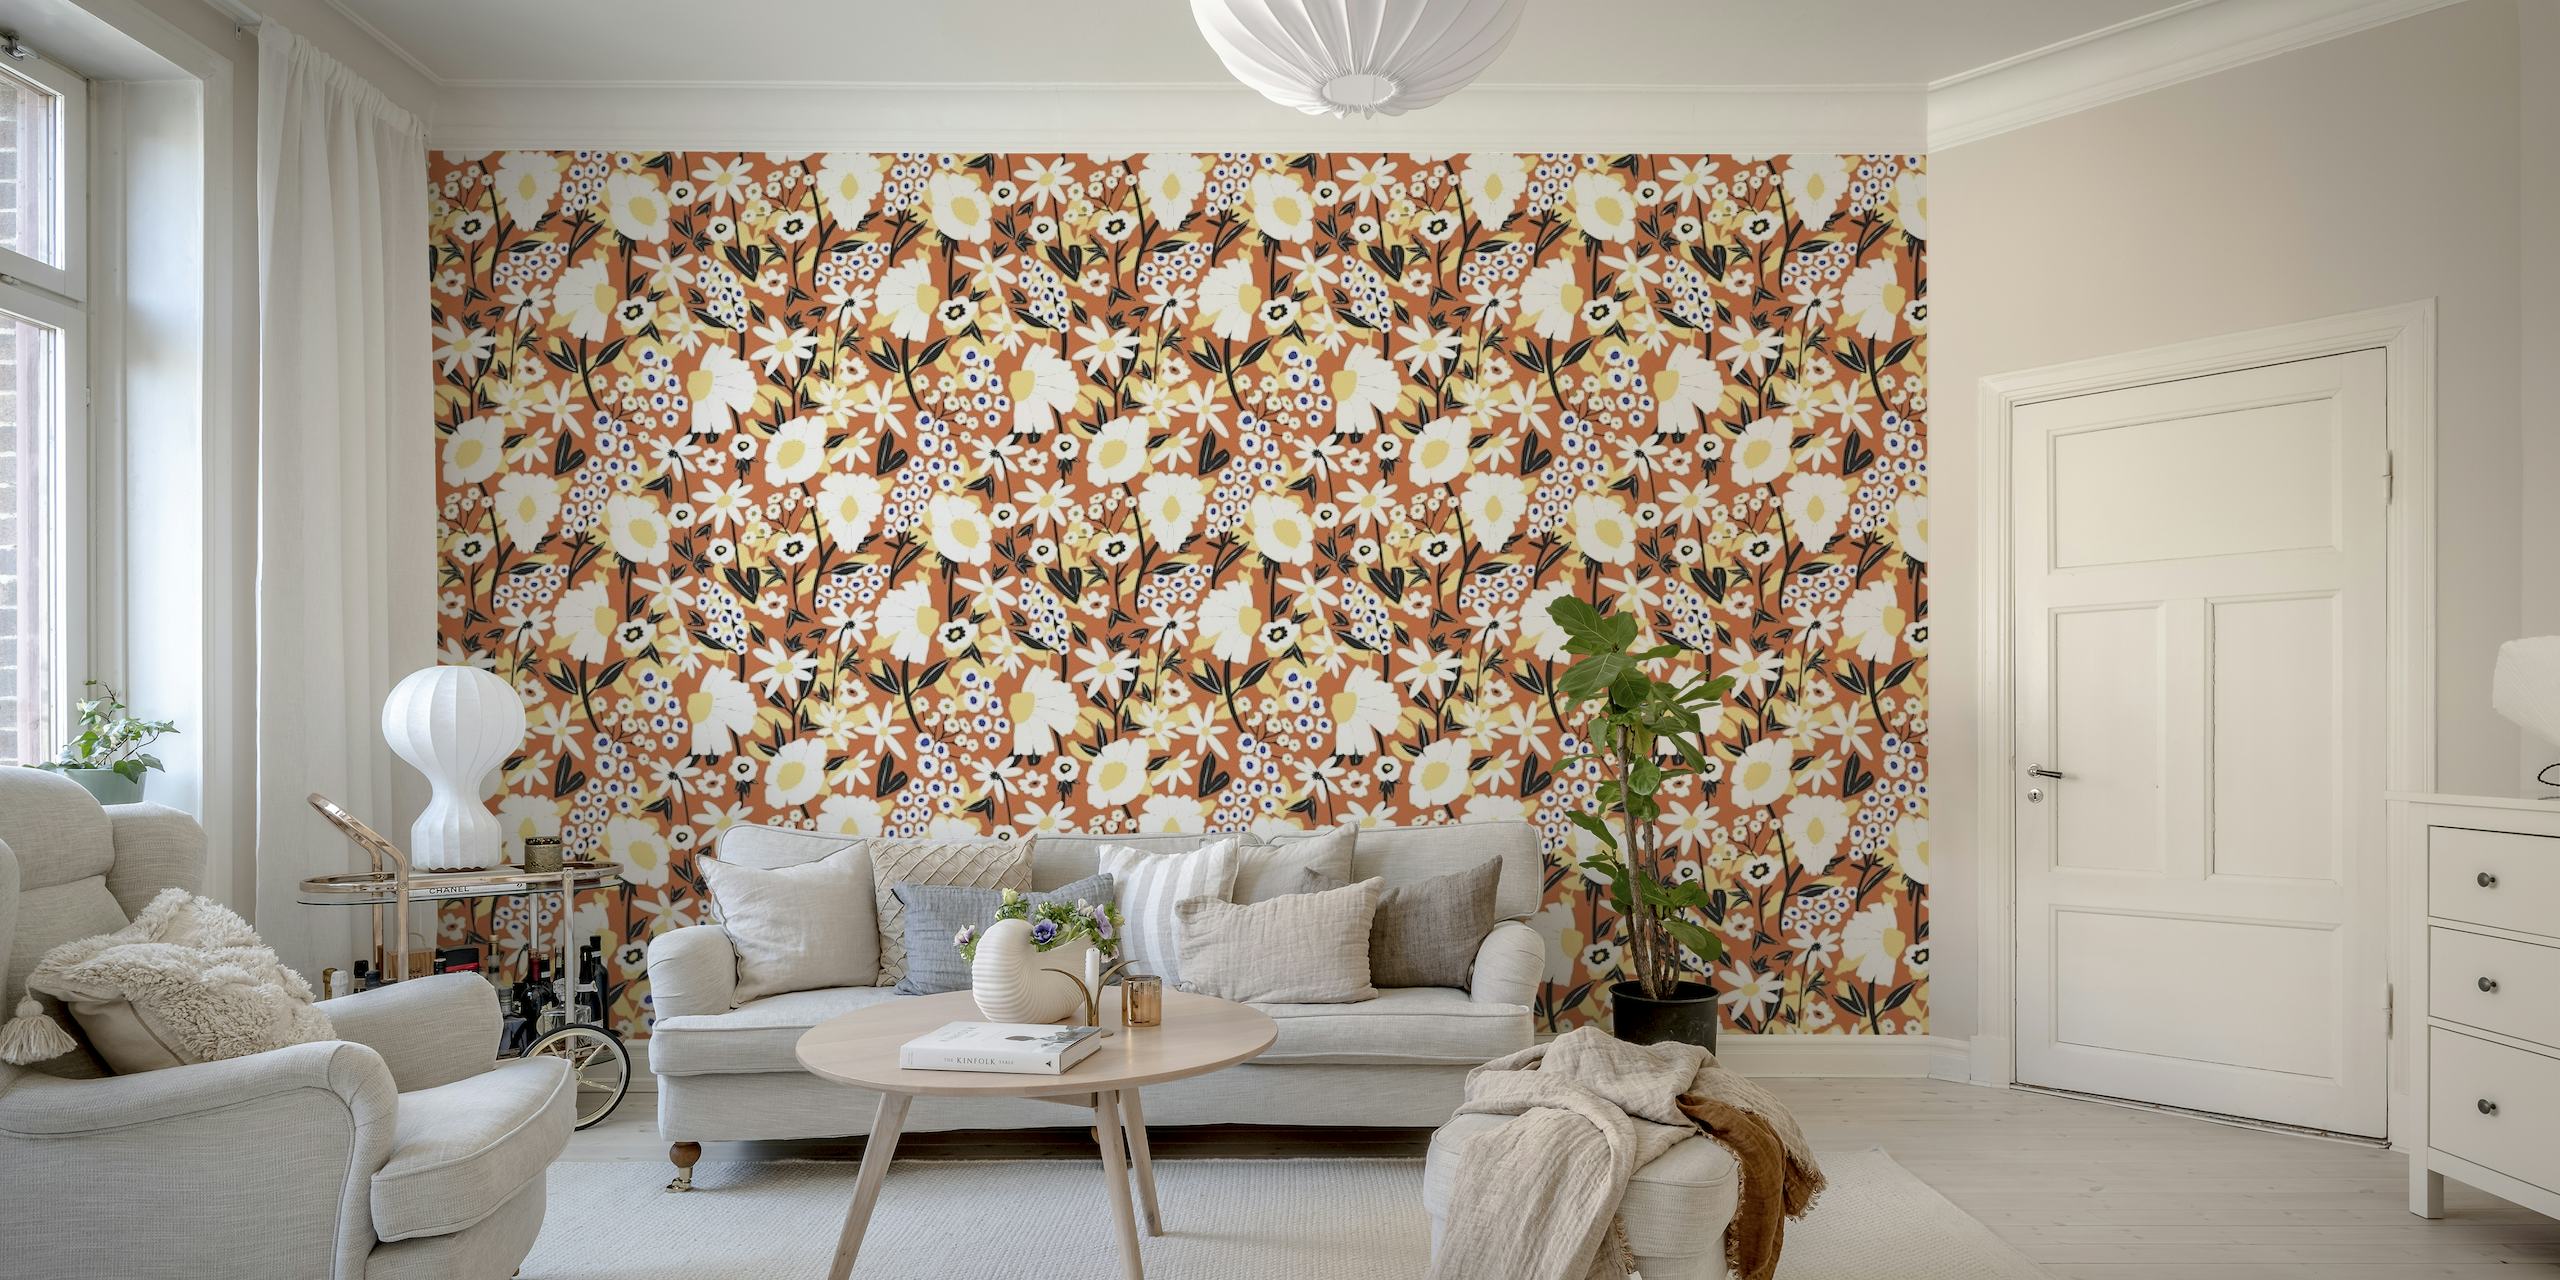 Meadow Forest Blossom wall mural with a dense floral pattern